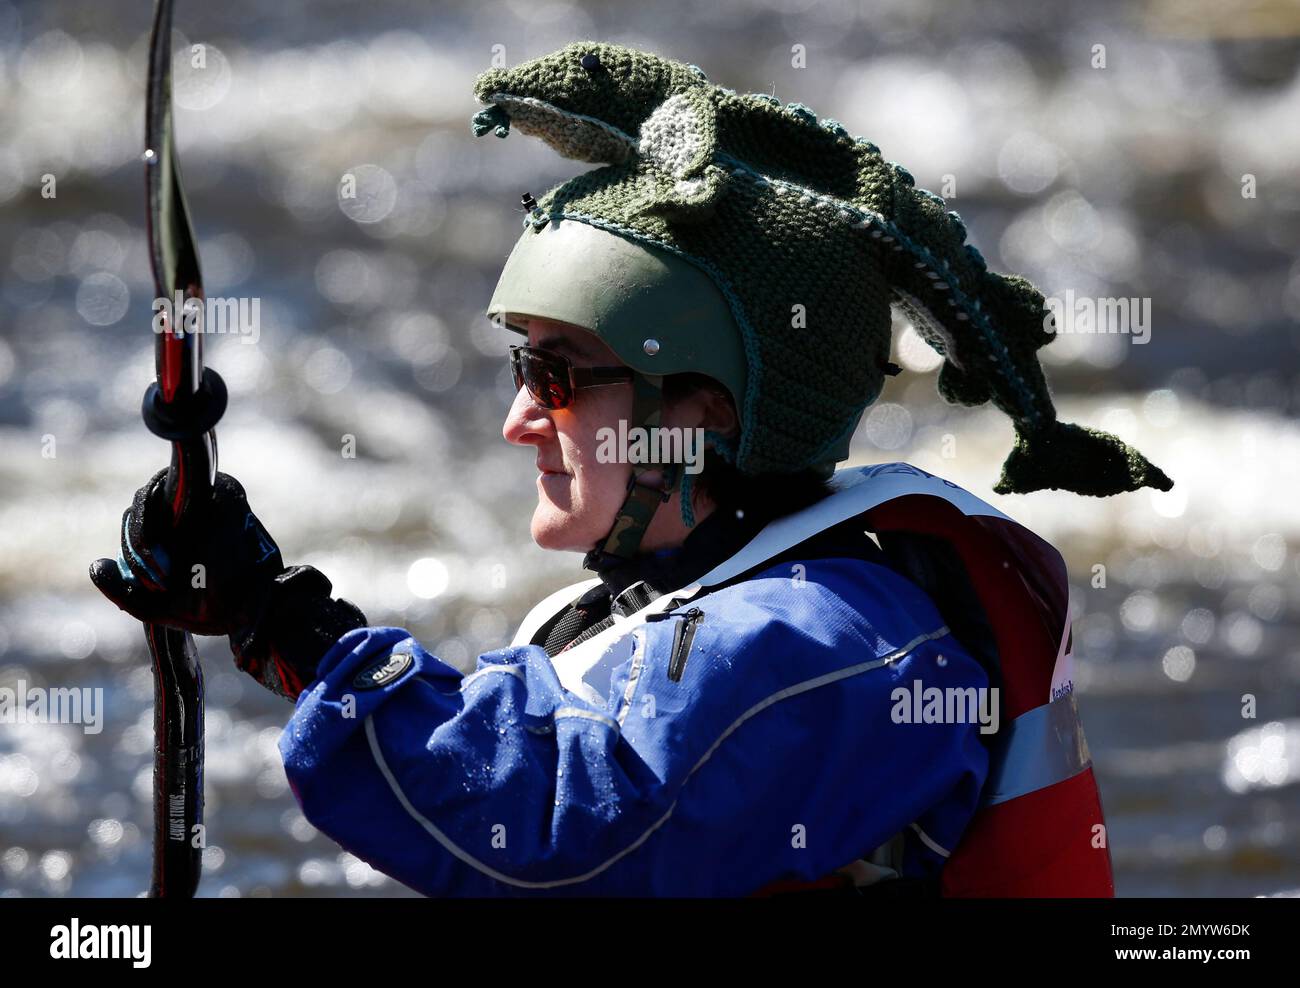 A kayaker wears a costume helmet cover while competing in the 50th Kenduskeag Stream Canoe Race, Saturday, April 16, 2016, in Bangor, Maine